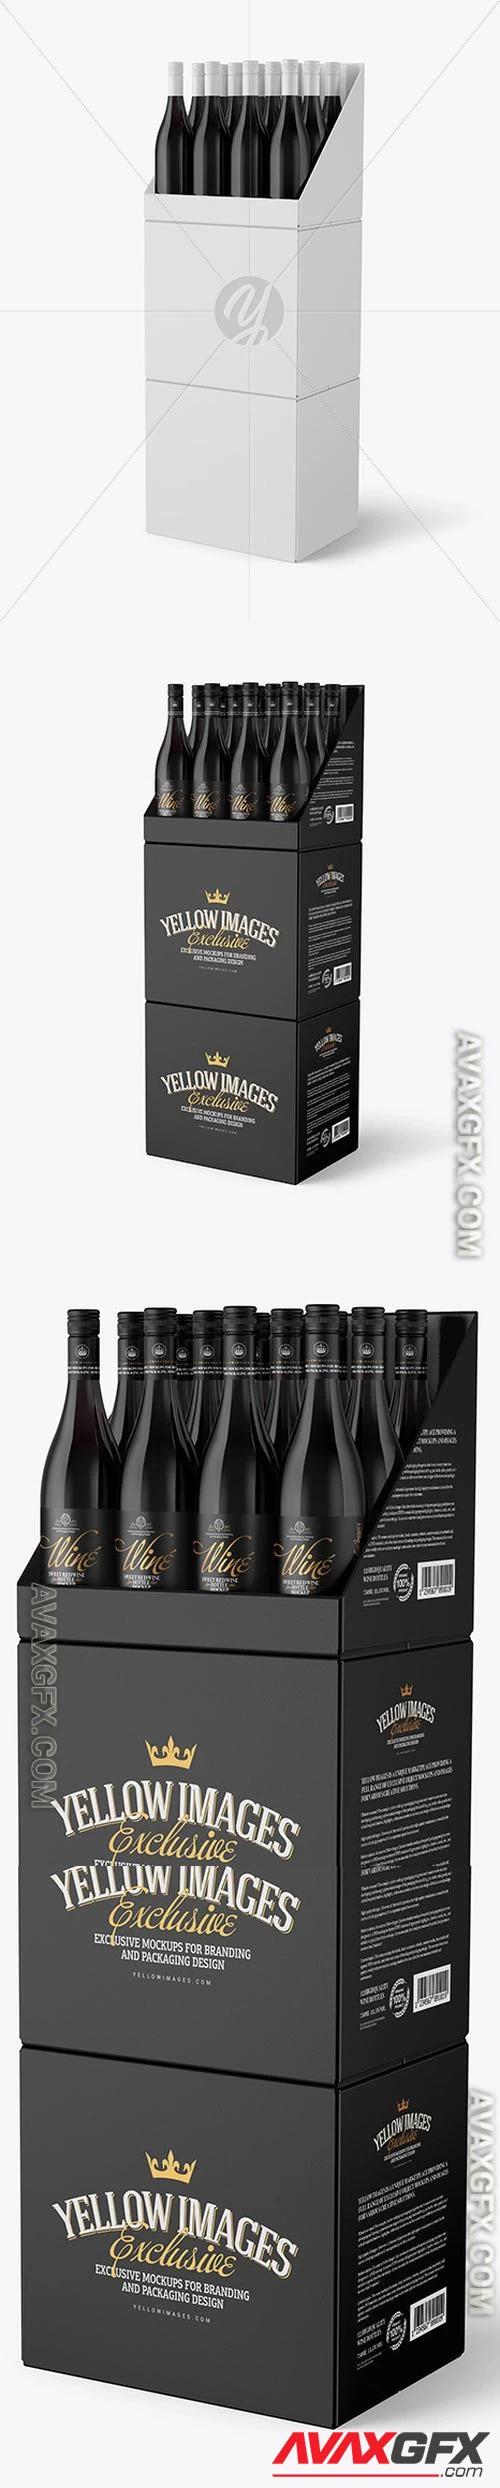 Stand with Red Wine Bottles Mockup 50873